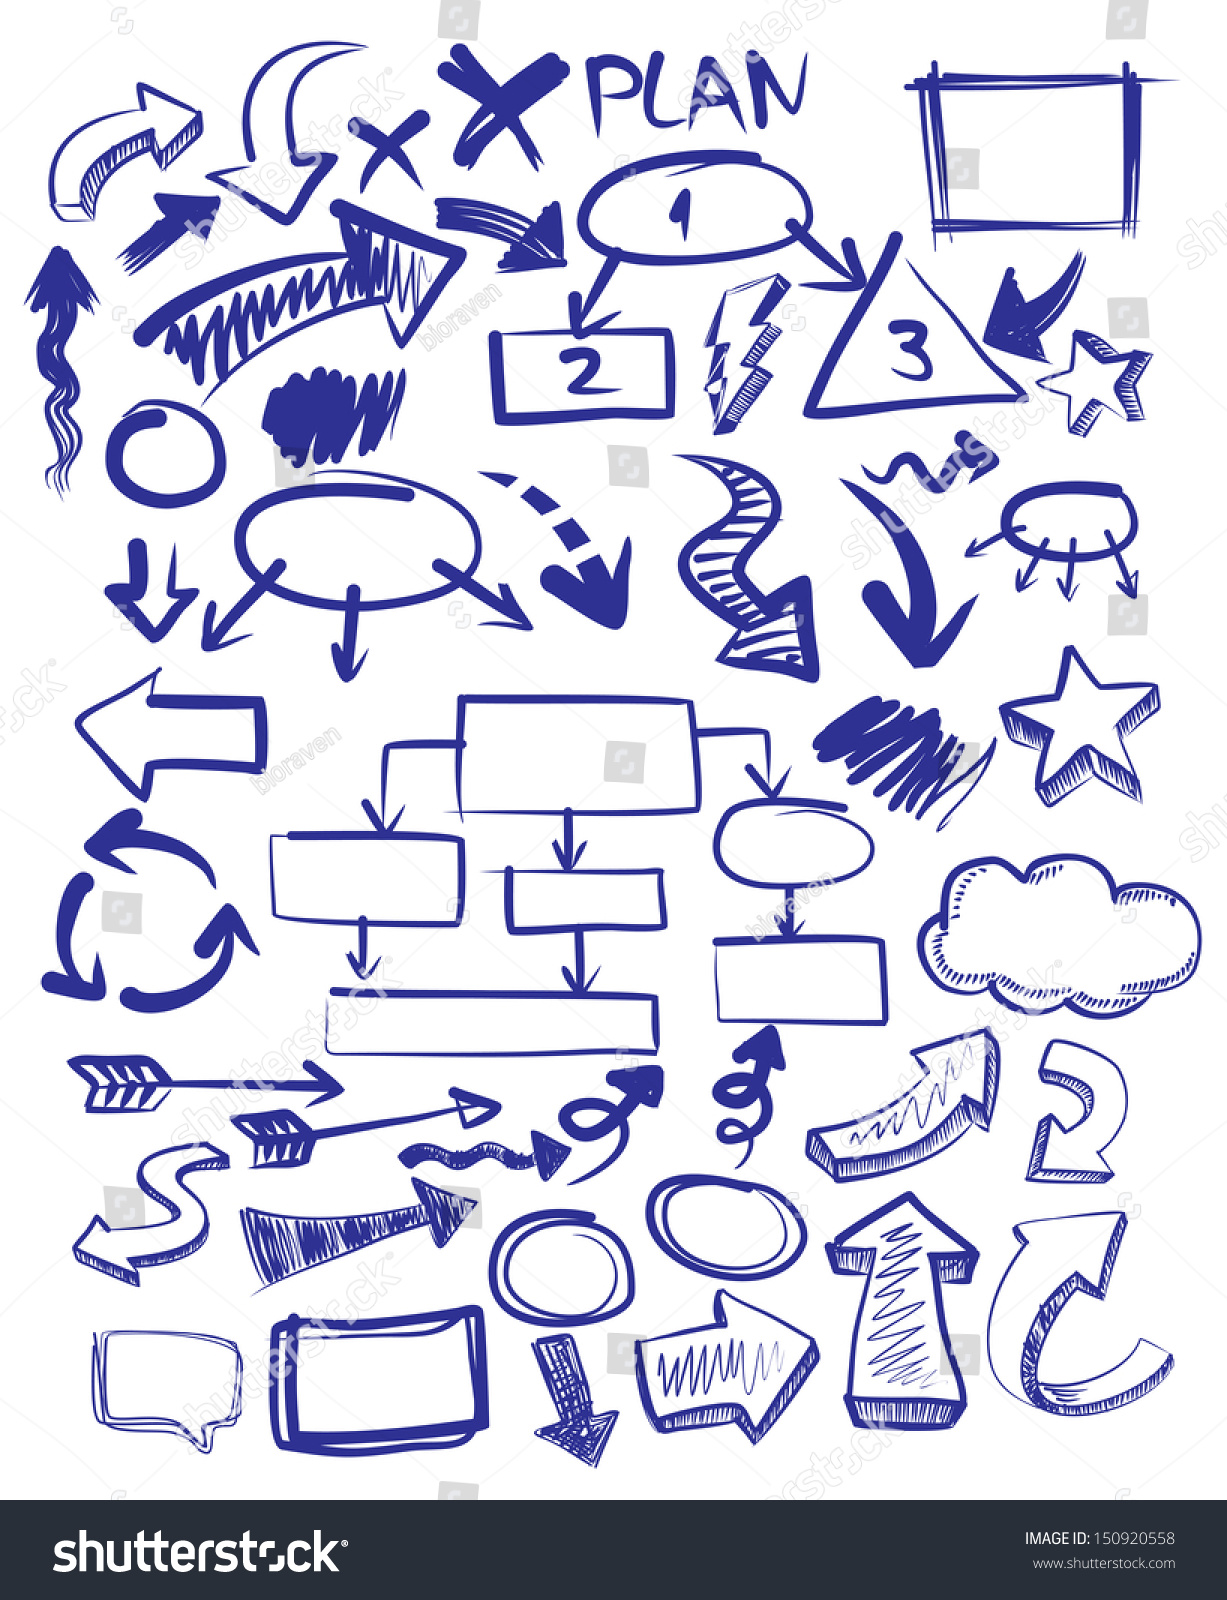 Vector Hand Drawn Arrows Icons Set On White - 150920558 : Shutterstock